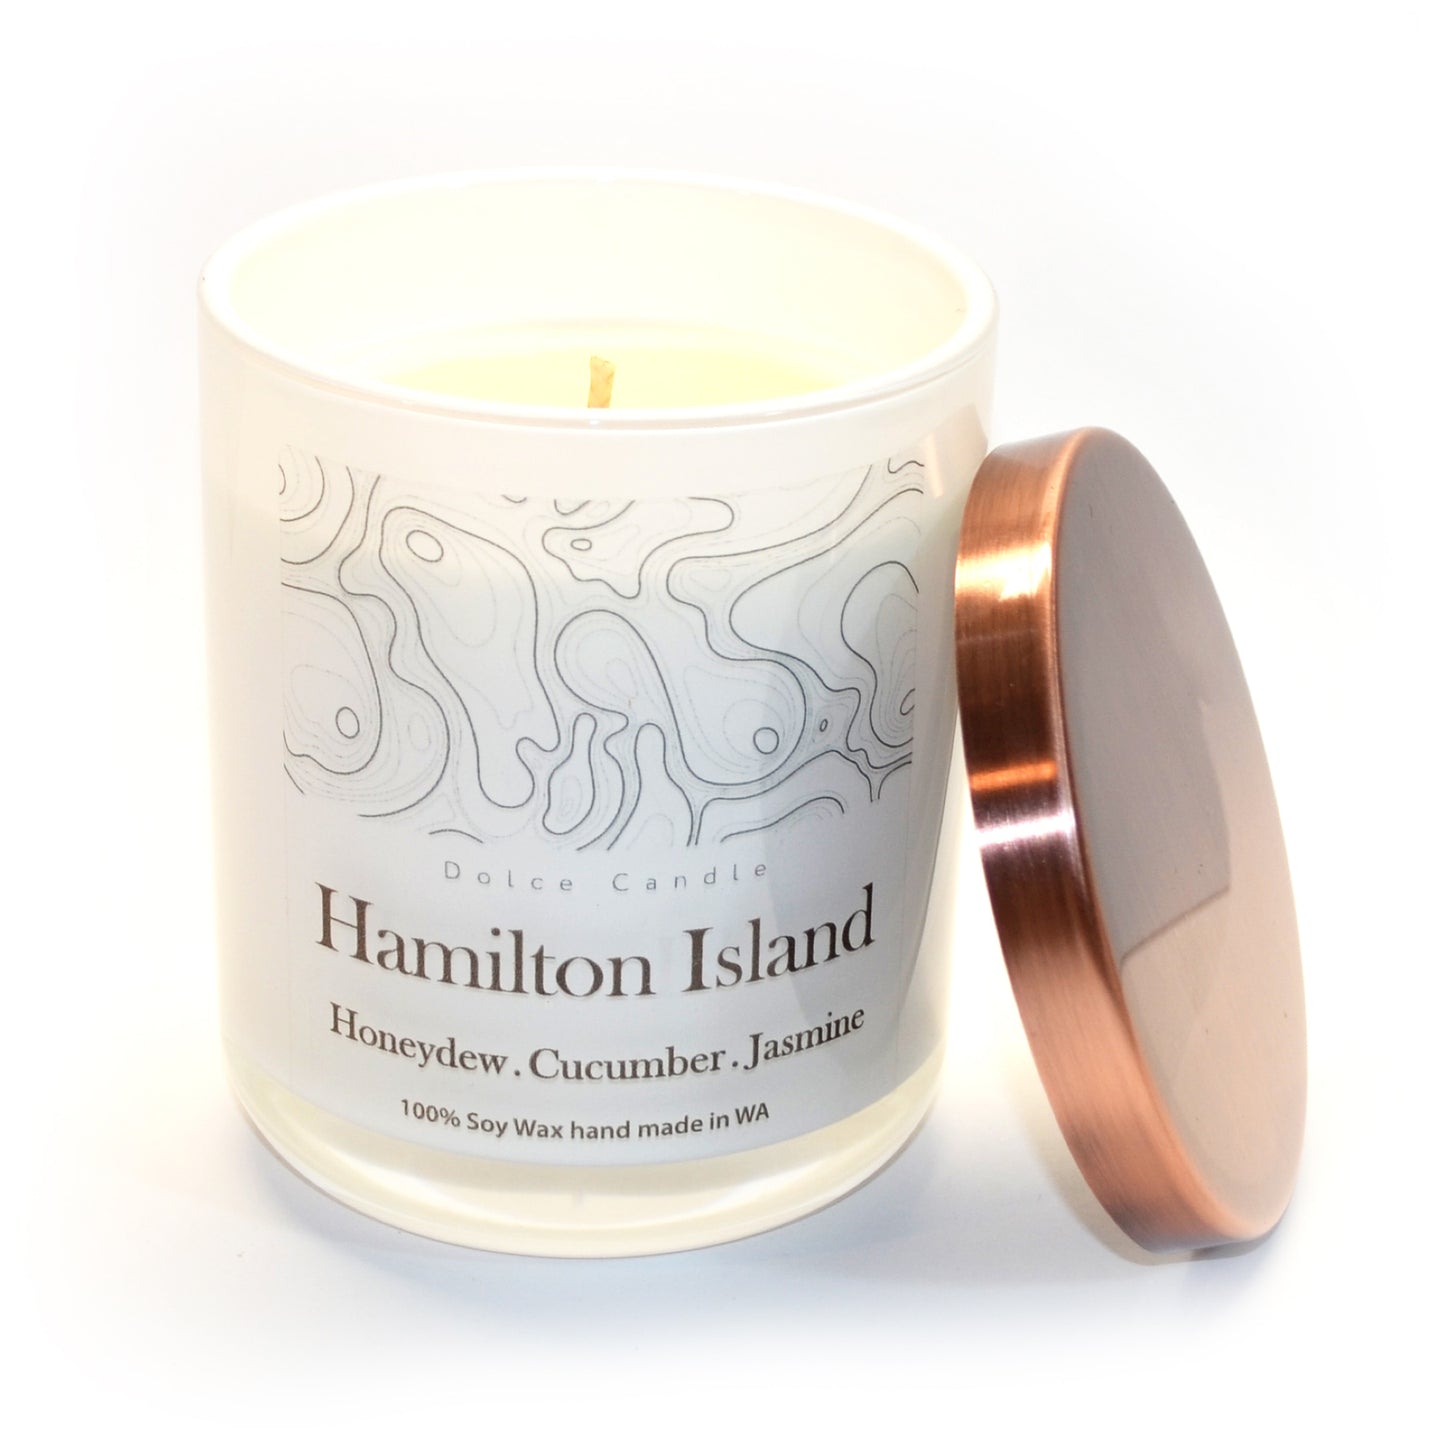 Hamilton Island | 300g Soy Wax Candle | Dolce Home | Handmade in W.A.